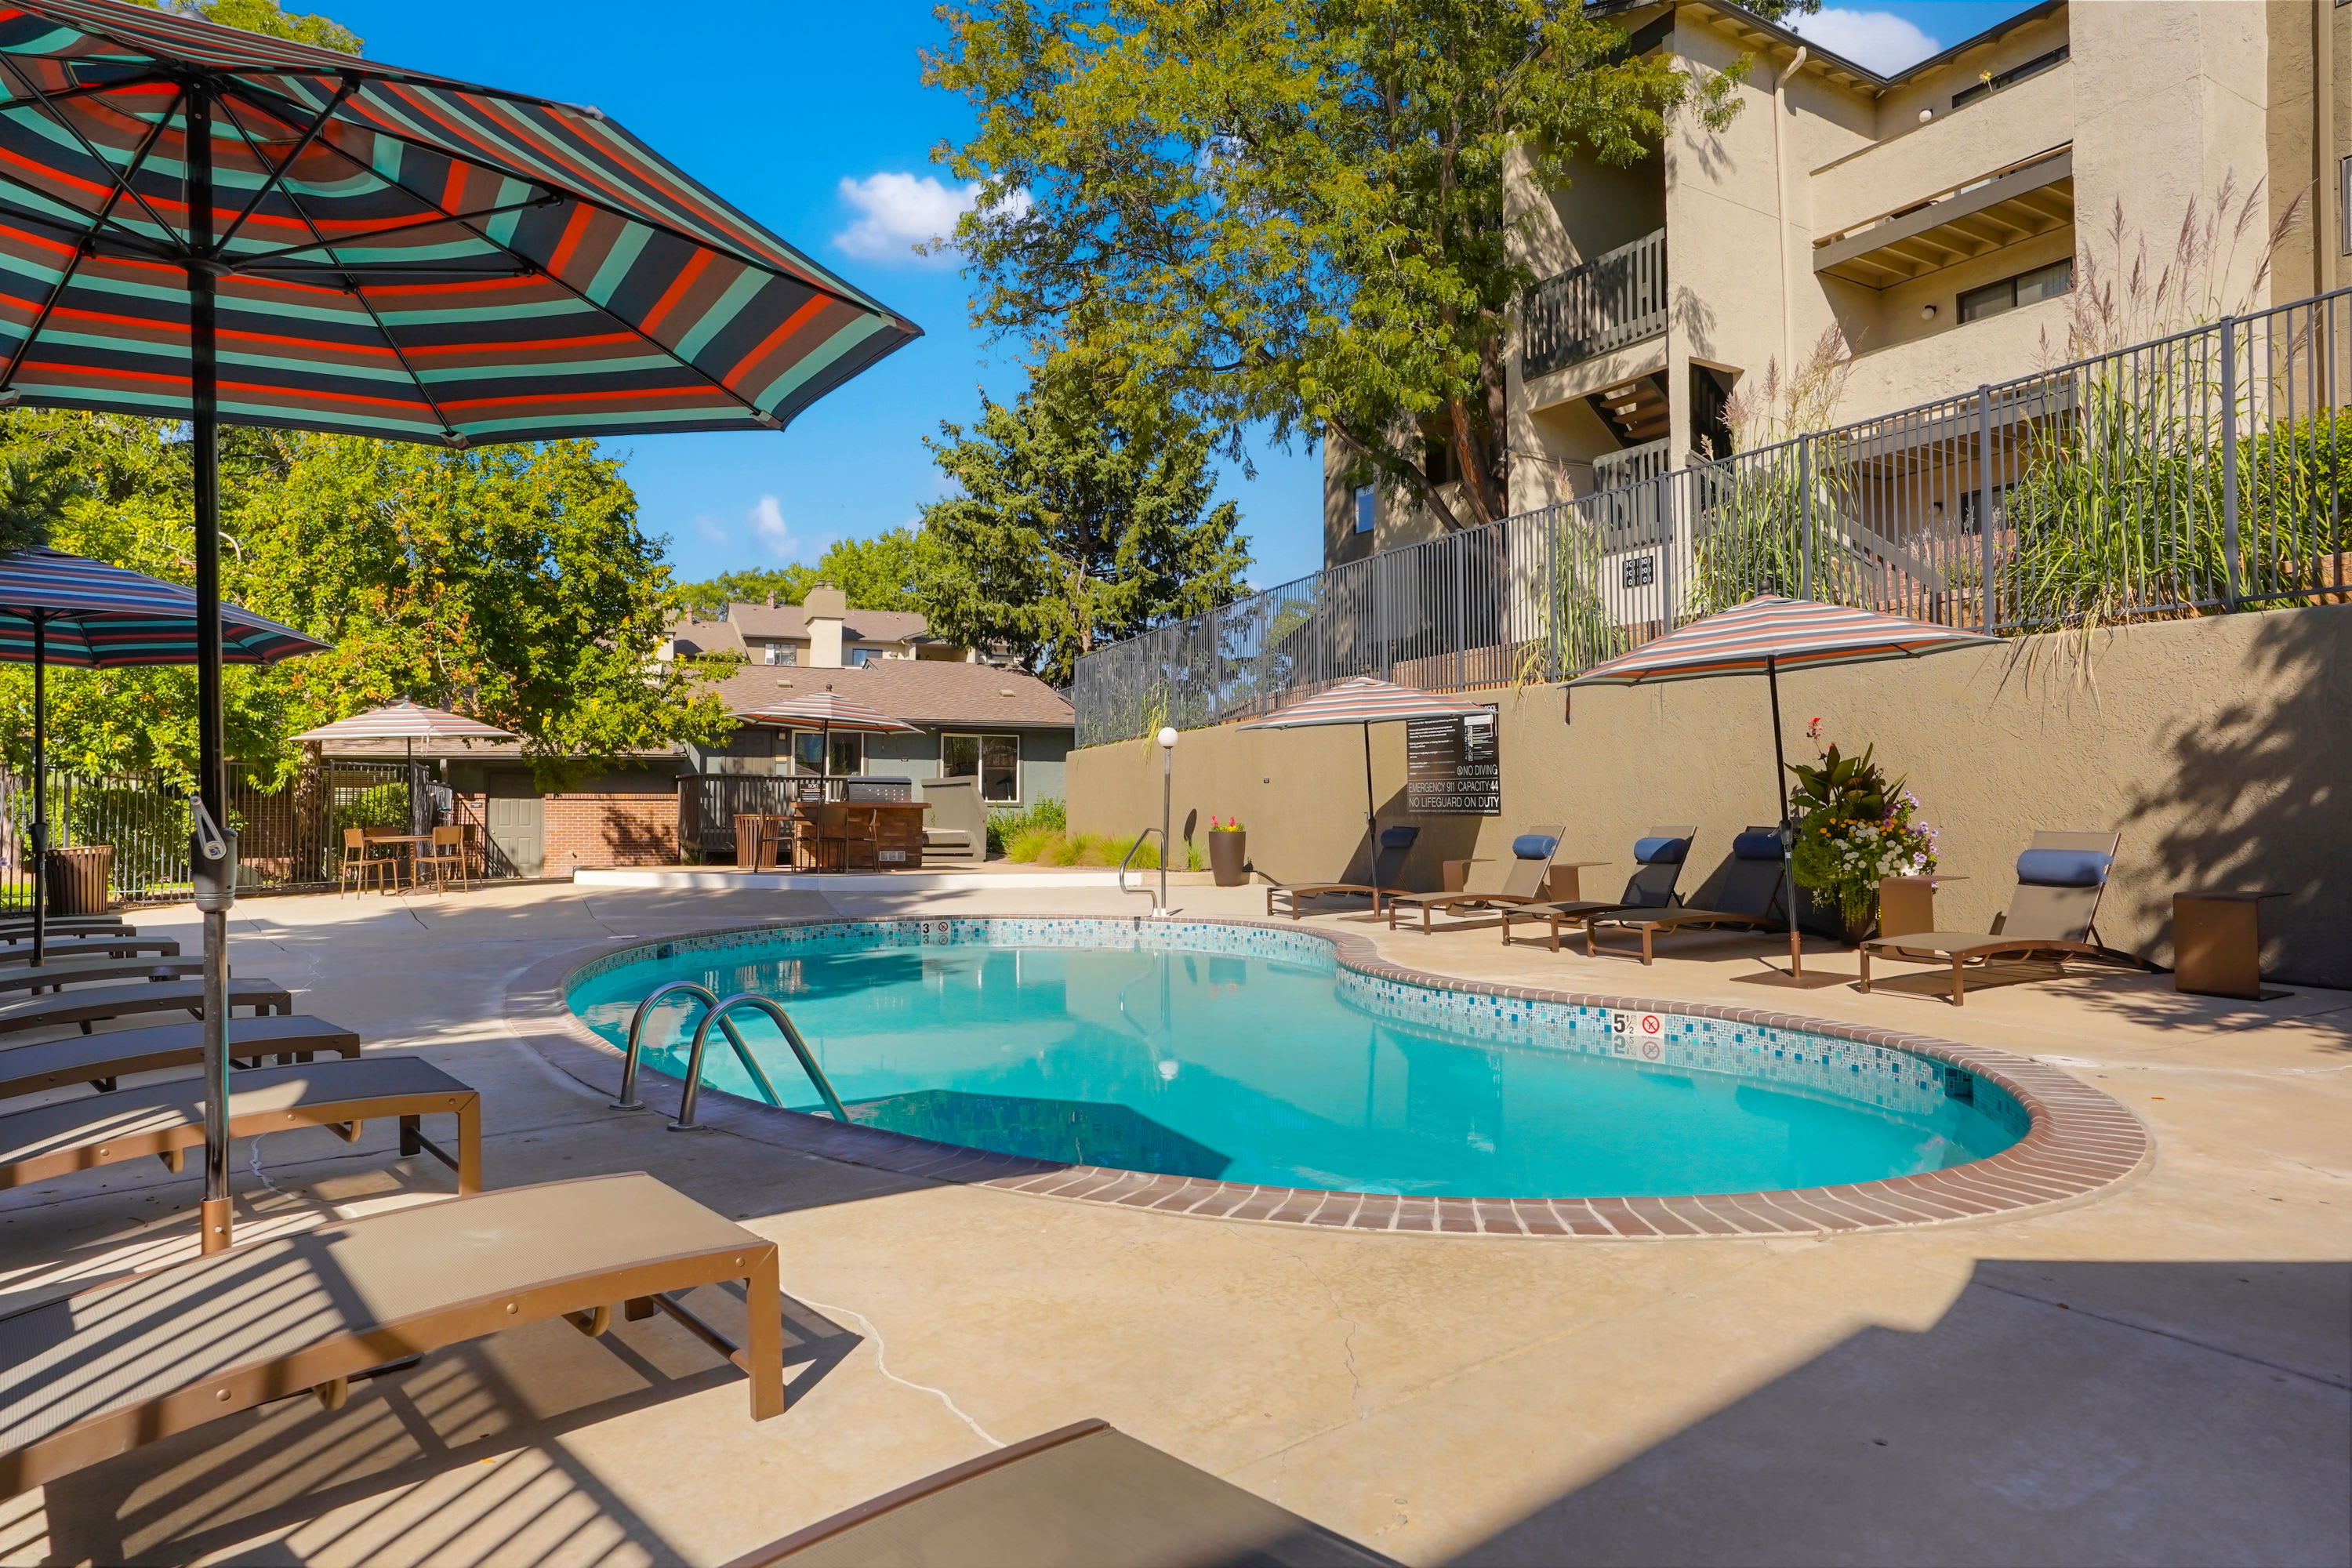 Awesome pool with lounge chairs on the side to relax in at Sofi Belmar in Lakewood, Colorado